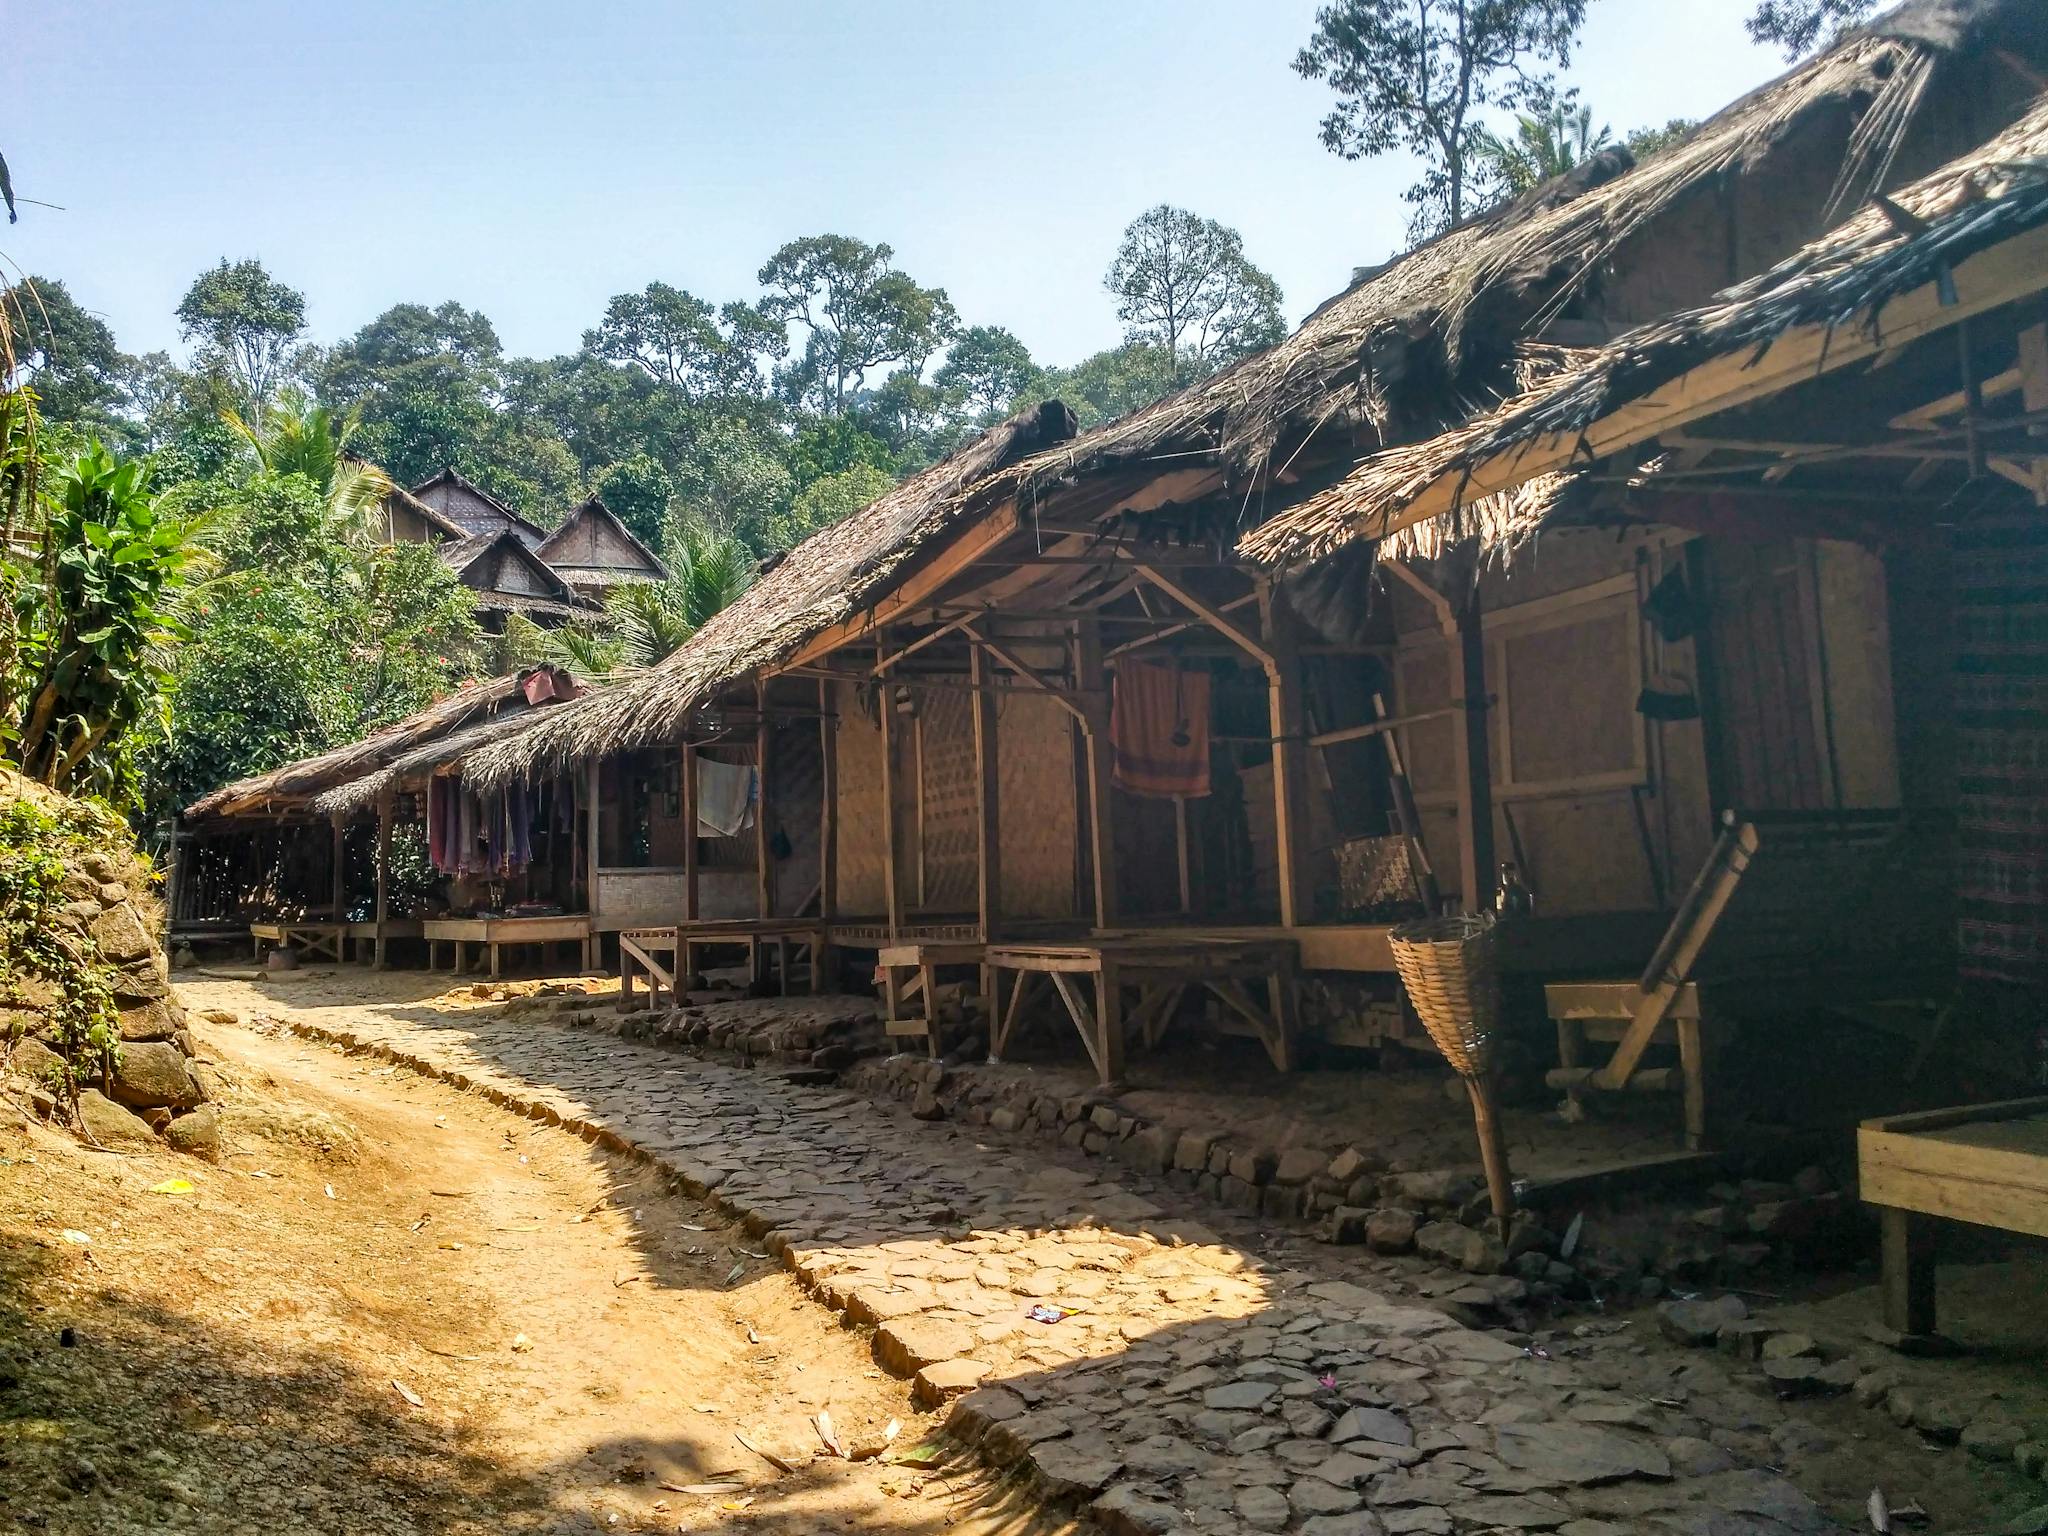 Staying a night in Baduy Tribe gives us a good perspektive in life